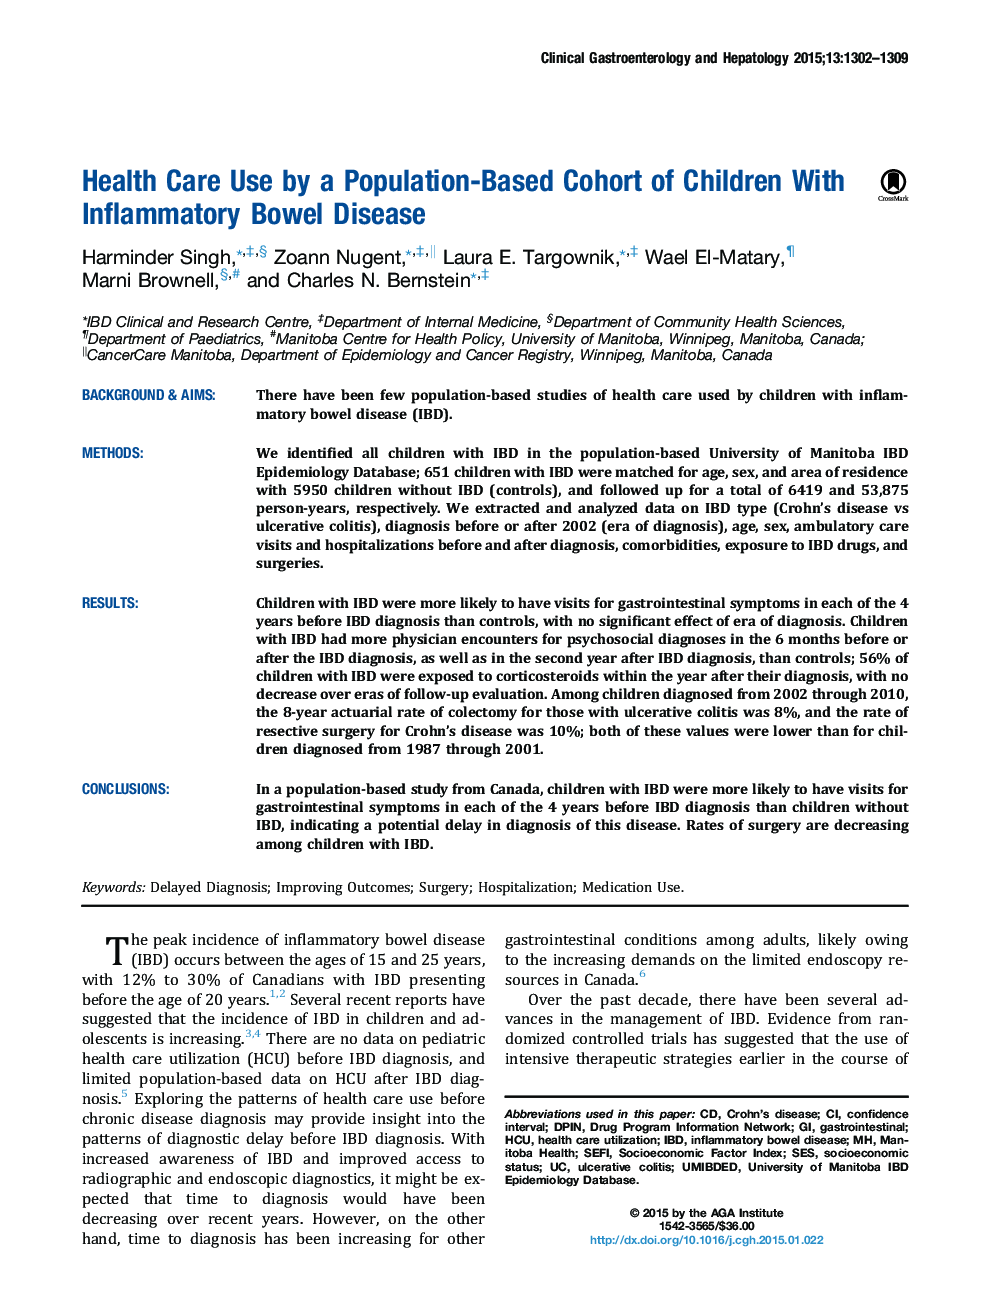 Health Care Use by a Population-Based Cohort of Children With Inflammatory Bowel Disease